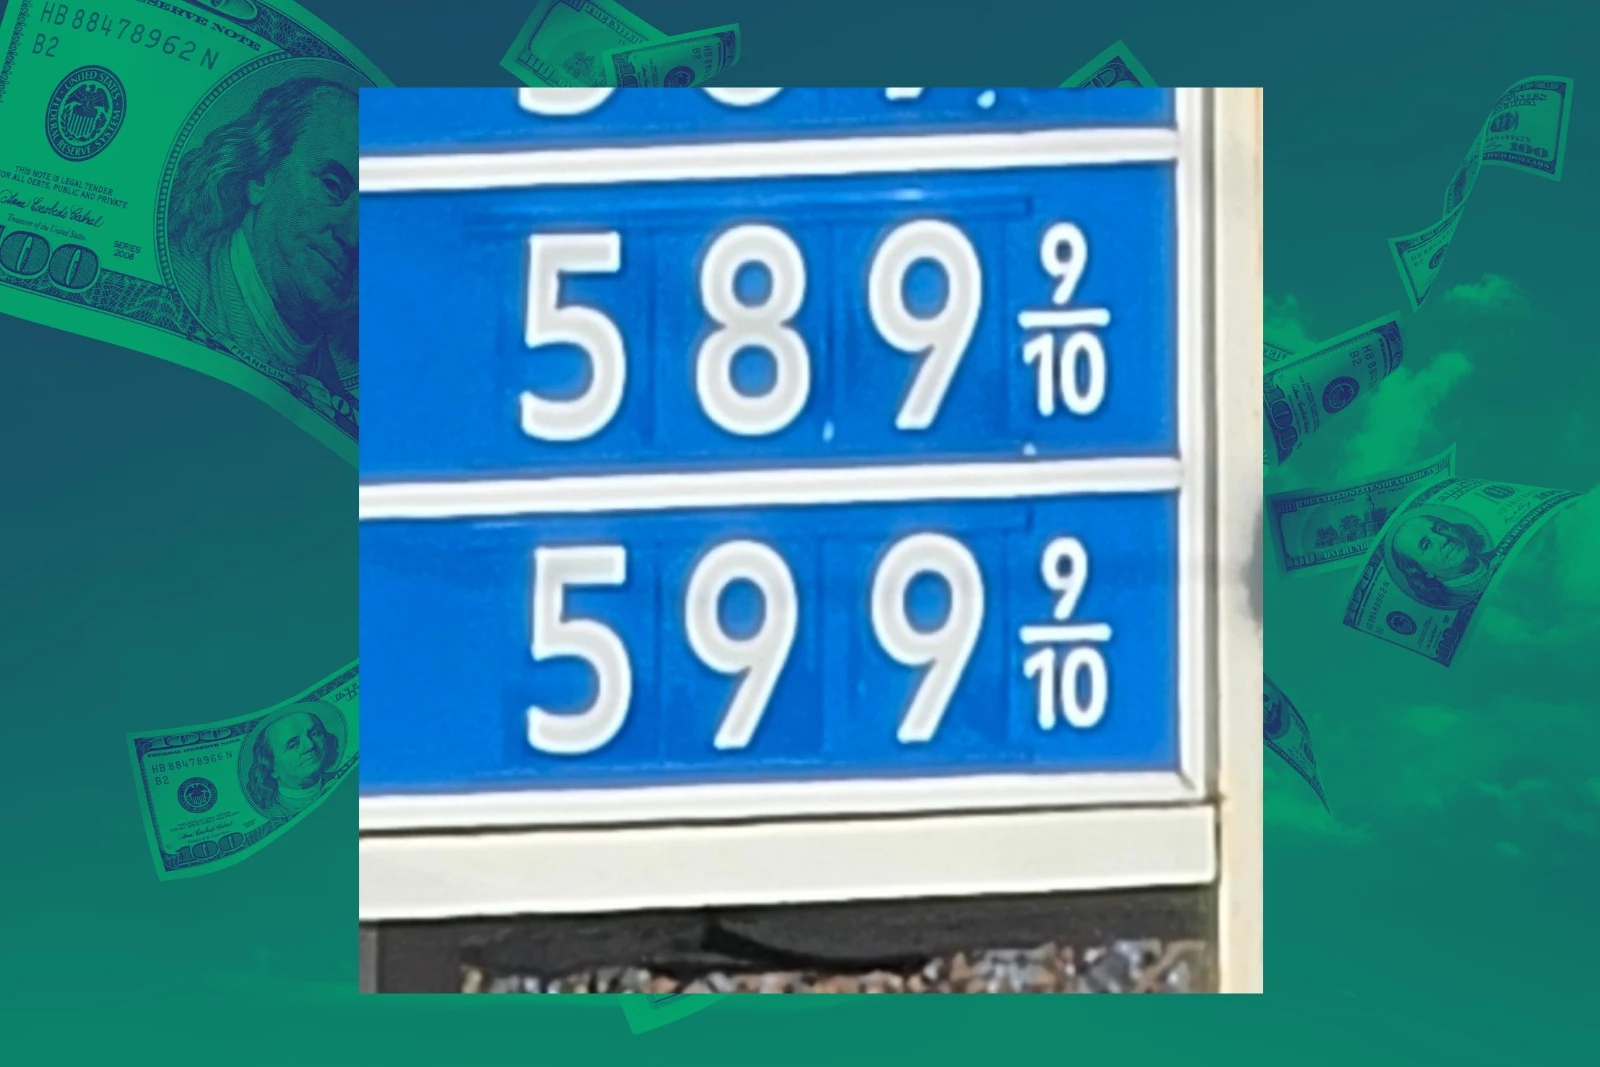 Expensive gas in New Jersey - Photo: Chris Coleman/Canva